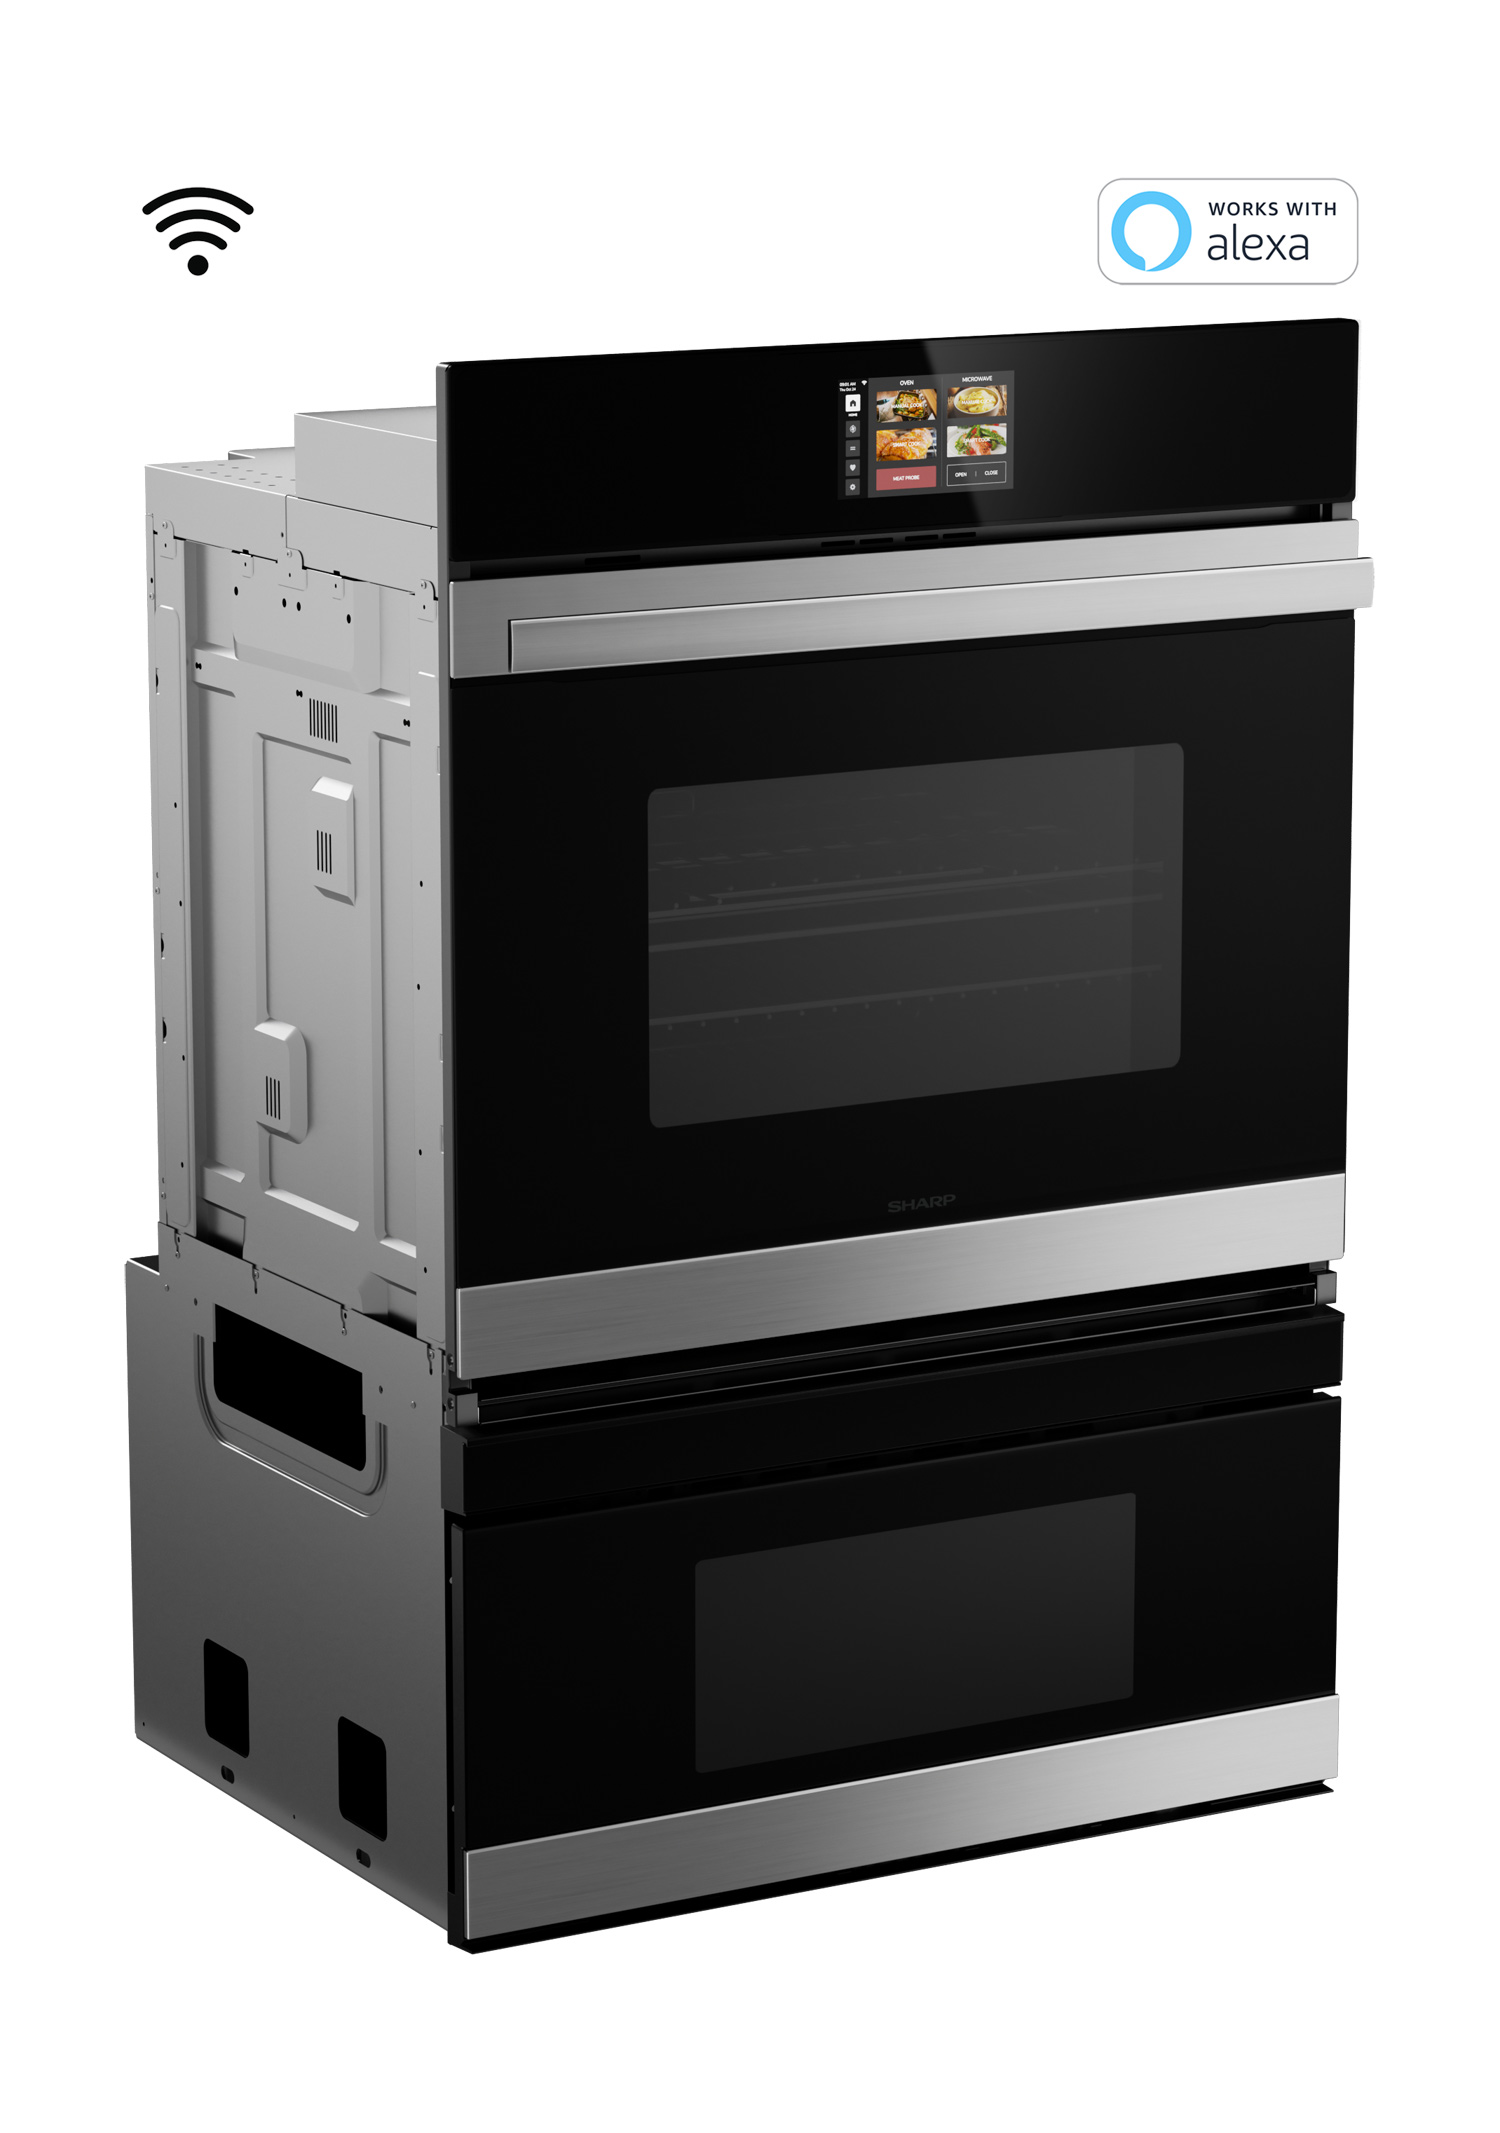 the Smart Oven® Compact Convection, Unboxing & walkthrough